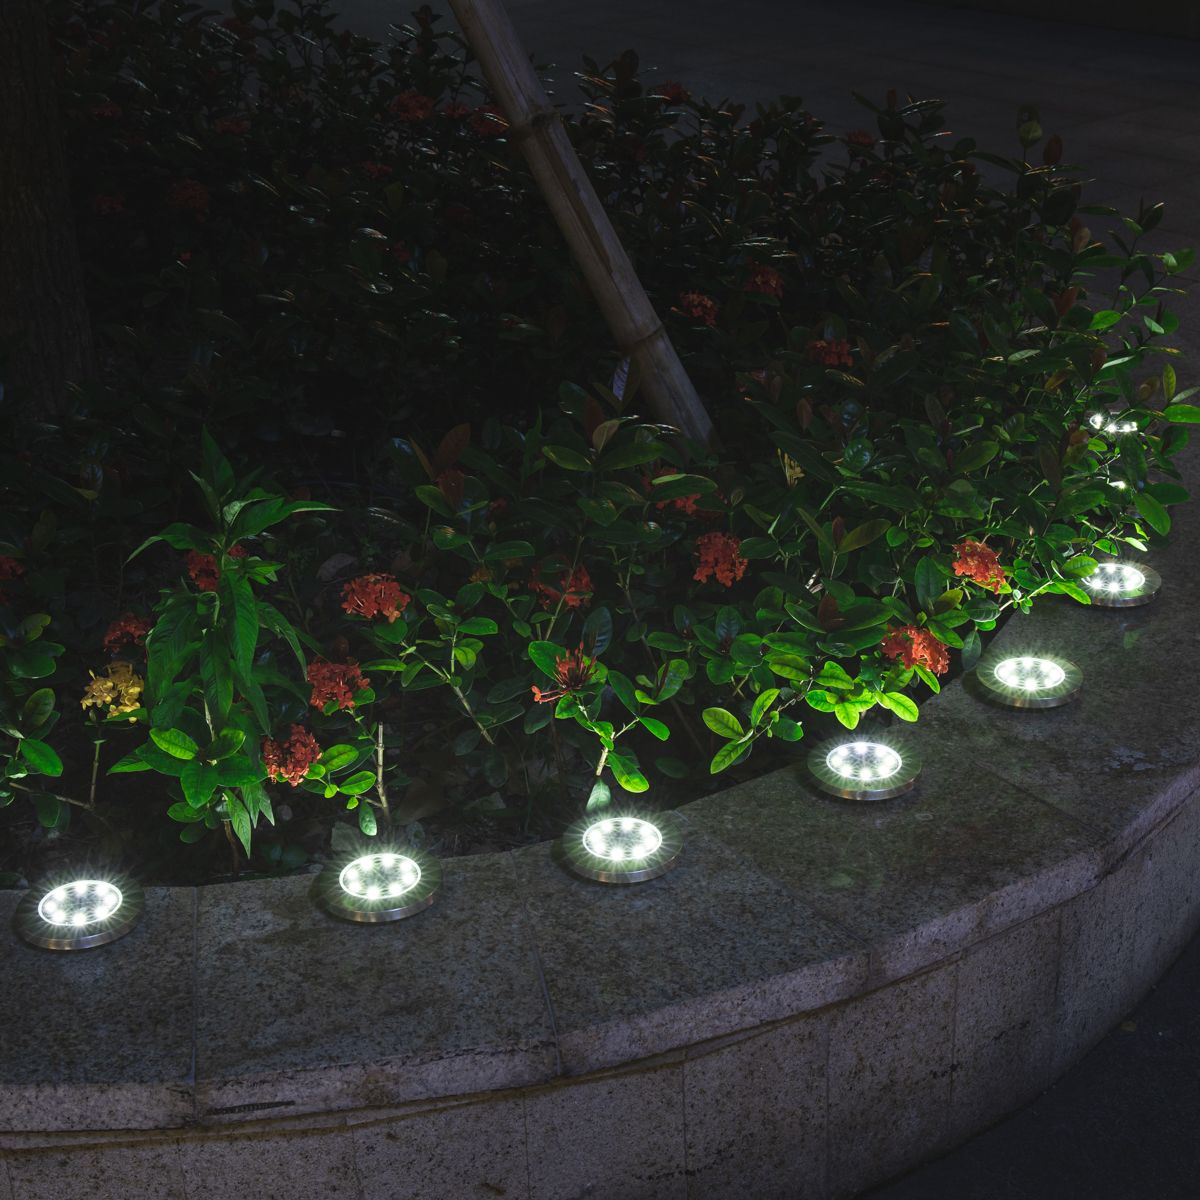 SOLMORE-8PCS-LED-Solar-Ground-Lawn-Light-Waterproof-Auto-OnOff-Landscape-Spike-Garden-Pathway-Lamp-f-1696954